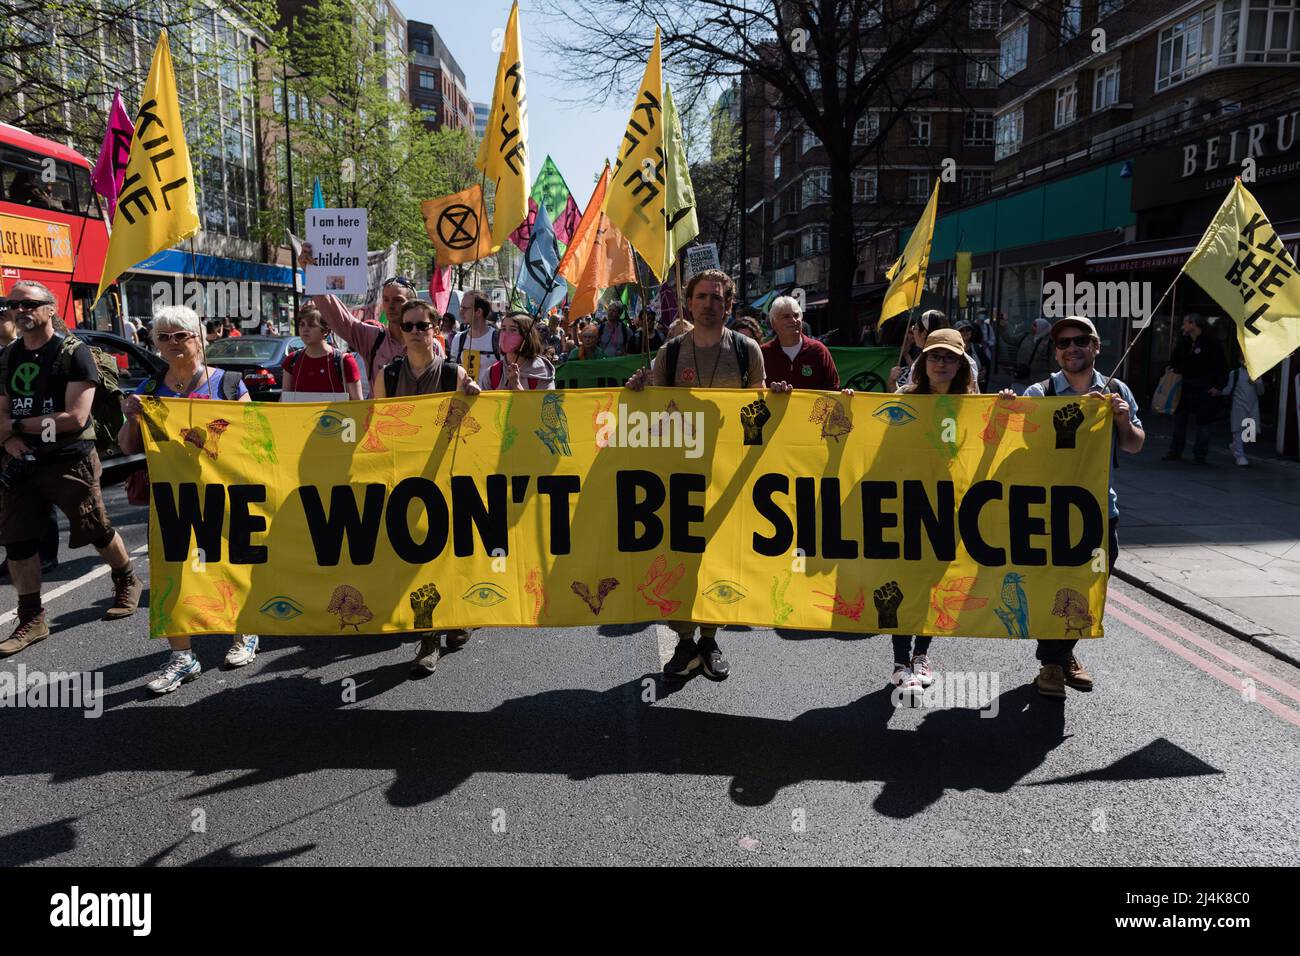 London, UK. 16th April, 2022. Activists from Extinction Rebellion march along Edgware Road on the eight day of protests and civil disobedience actions to demand an immediate stop to all new fossil fuel infrastructure by the British government amid climate crisis and ecological emergency. Credit: Wiktor Szymanowicz/Alamy Live News Stock Photo